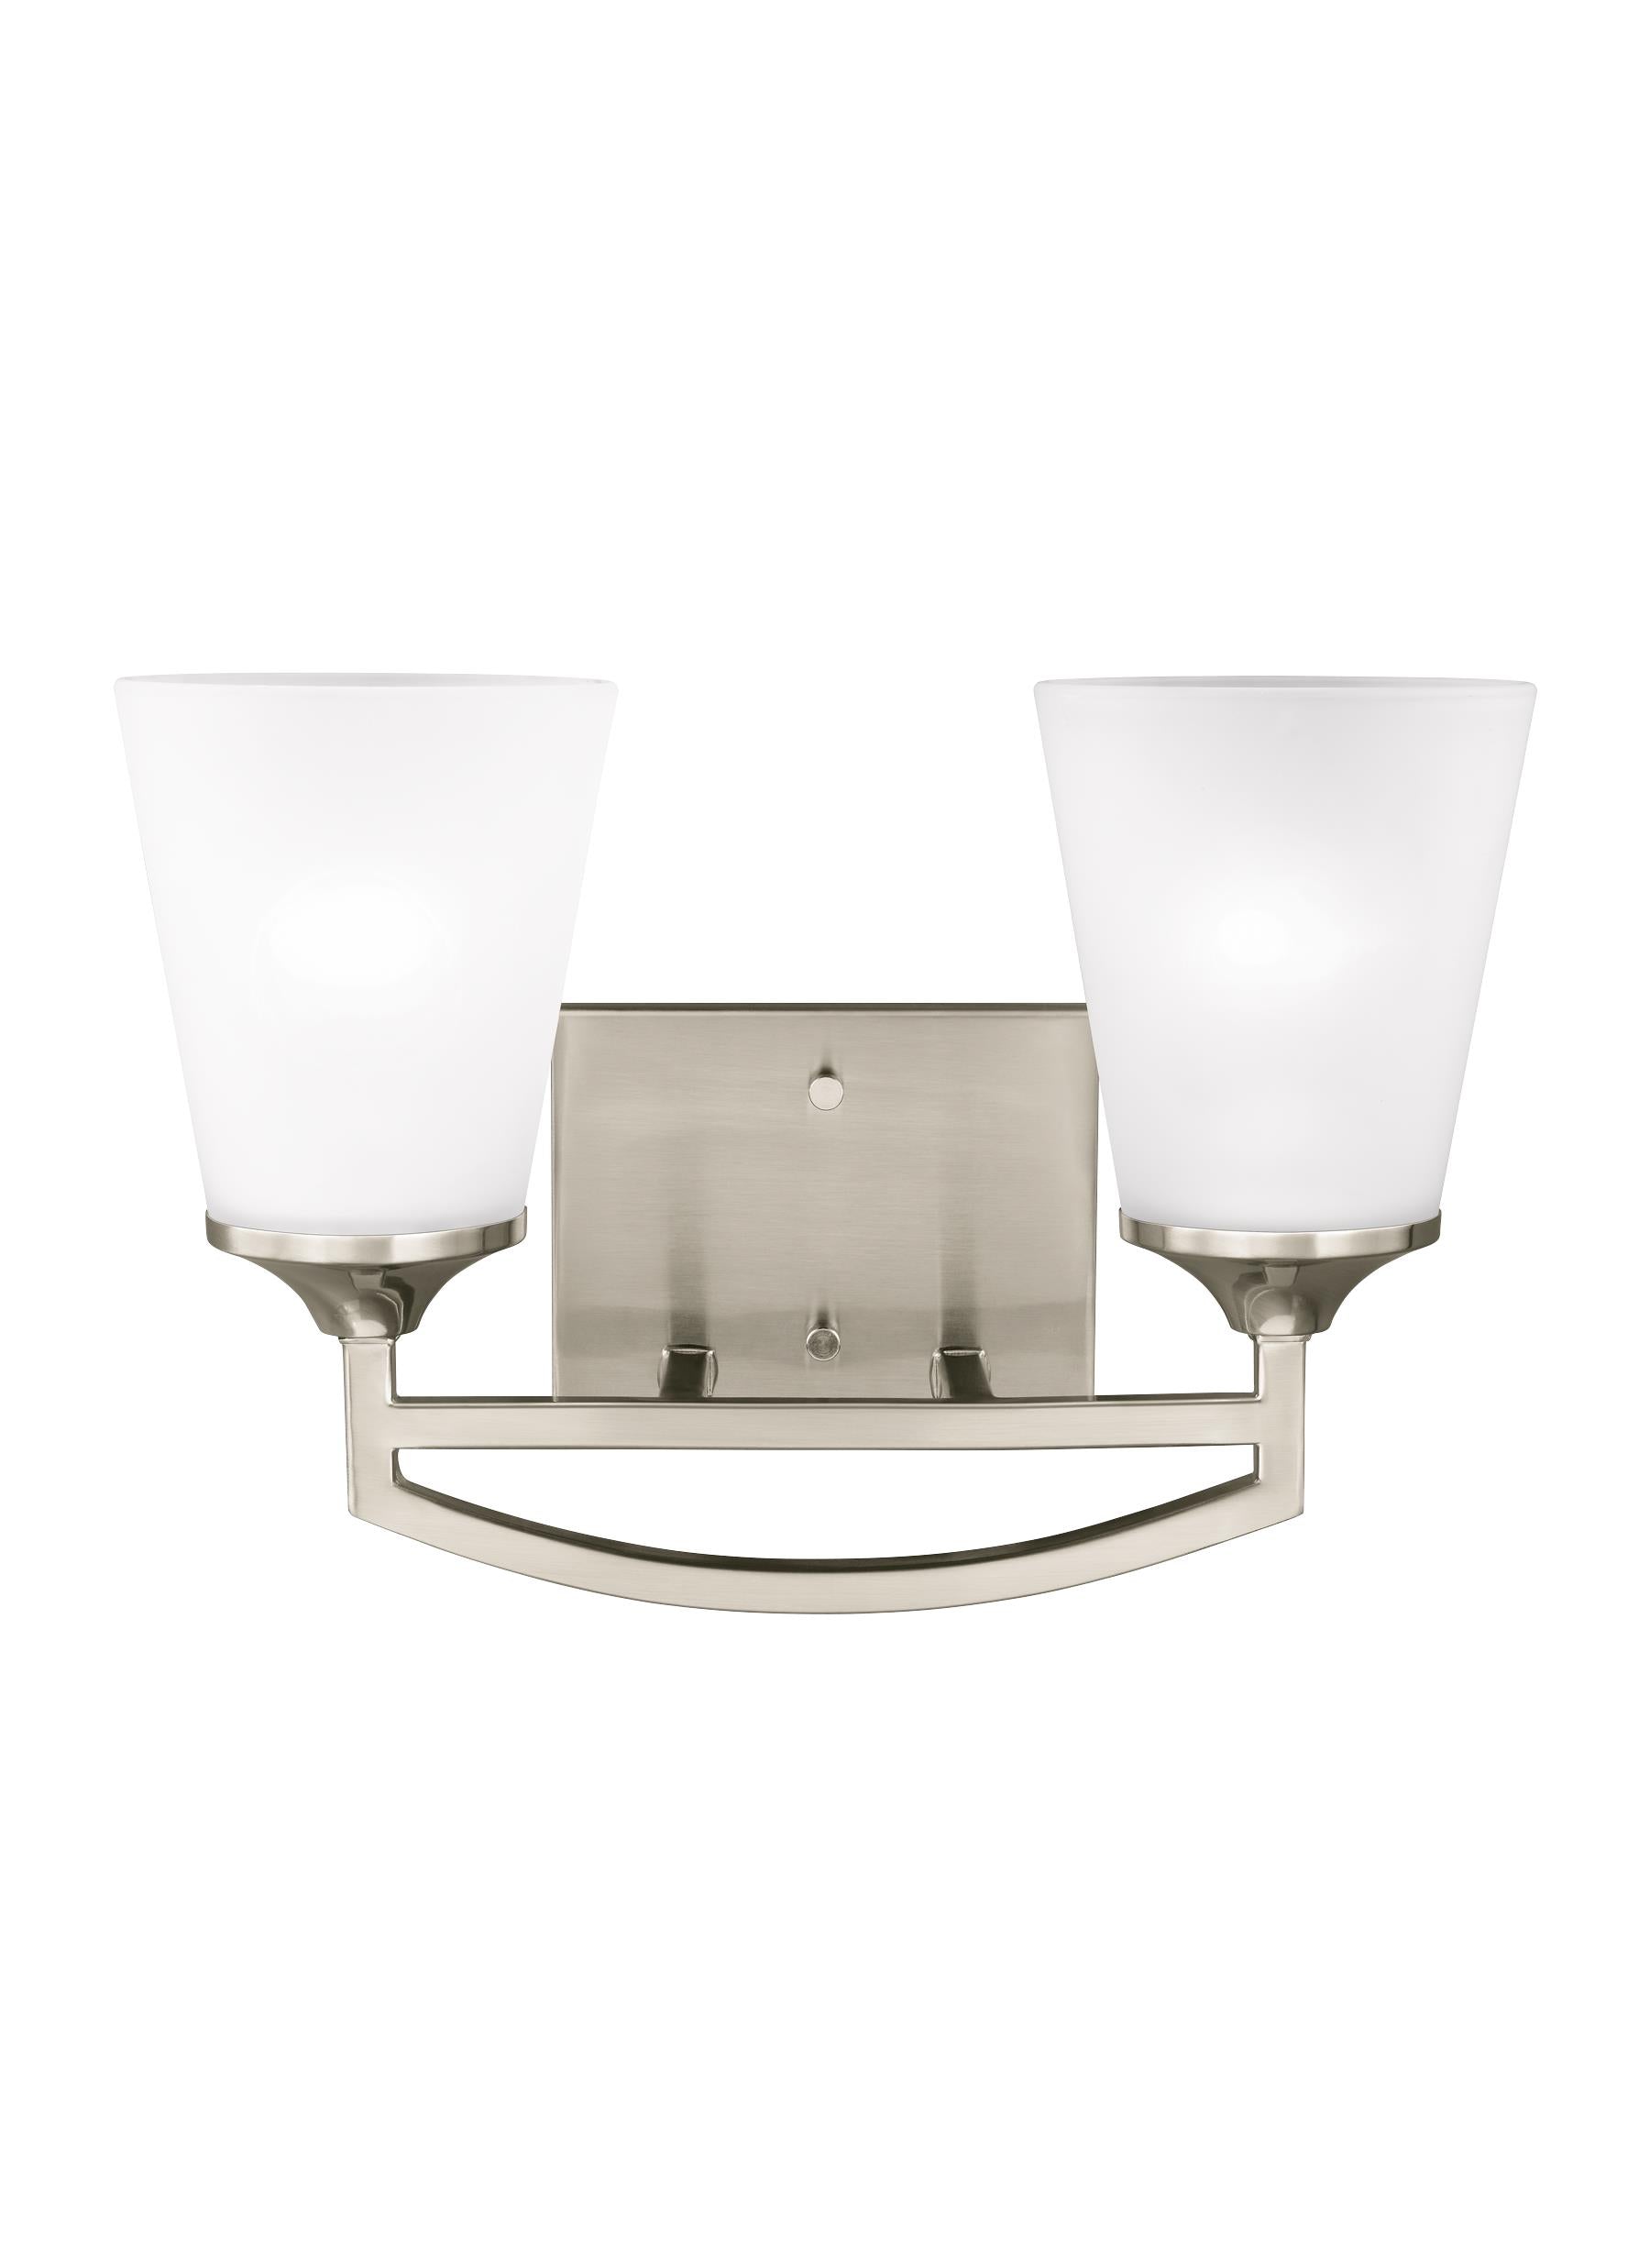 Hanford traditional 2-light indoor dimmable bath vanity wall sconce in brushed nickel silver finish with satin etched glas...